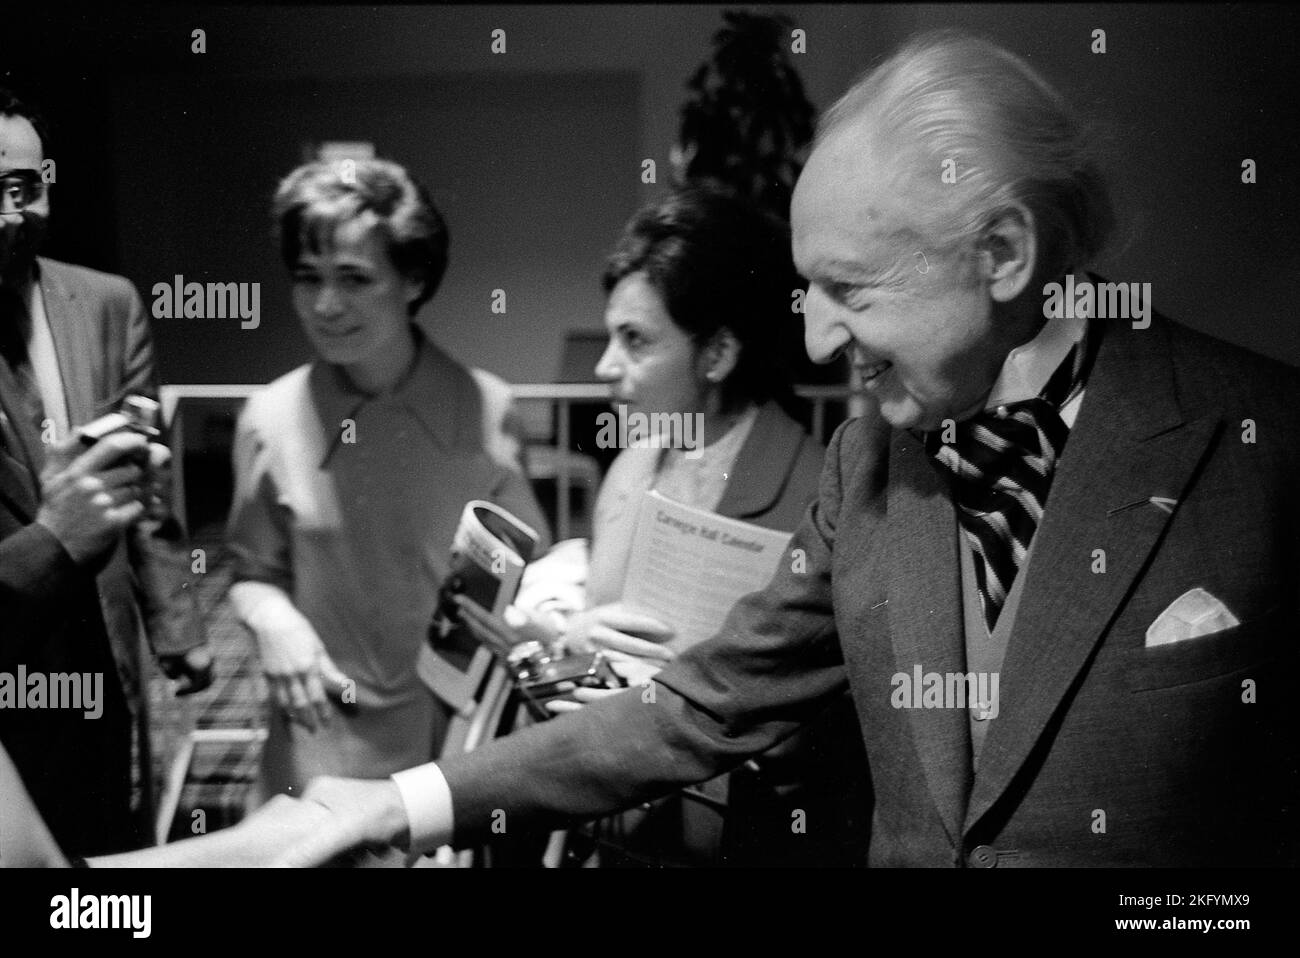 Leopold Stokowski, British orchestra conductor, after a performance at the Carnegie Hall with the American Symphony Orchestra, New York City, 1970 Stock Photo